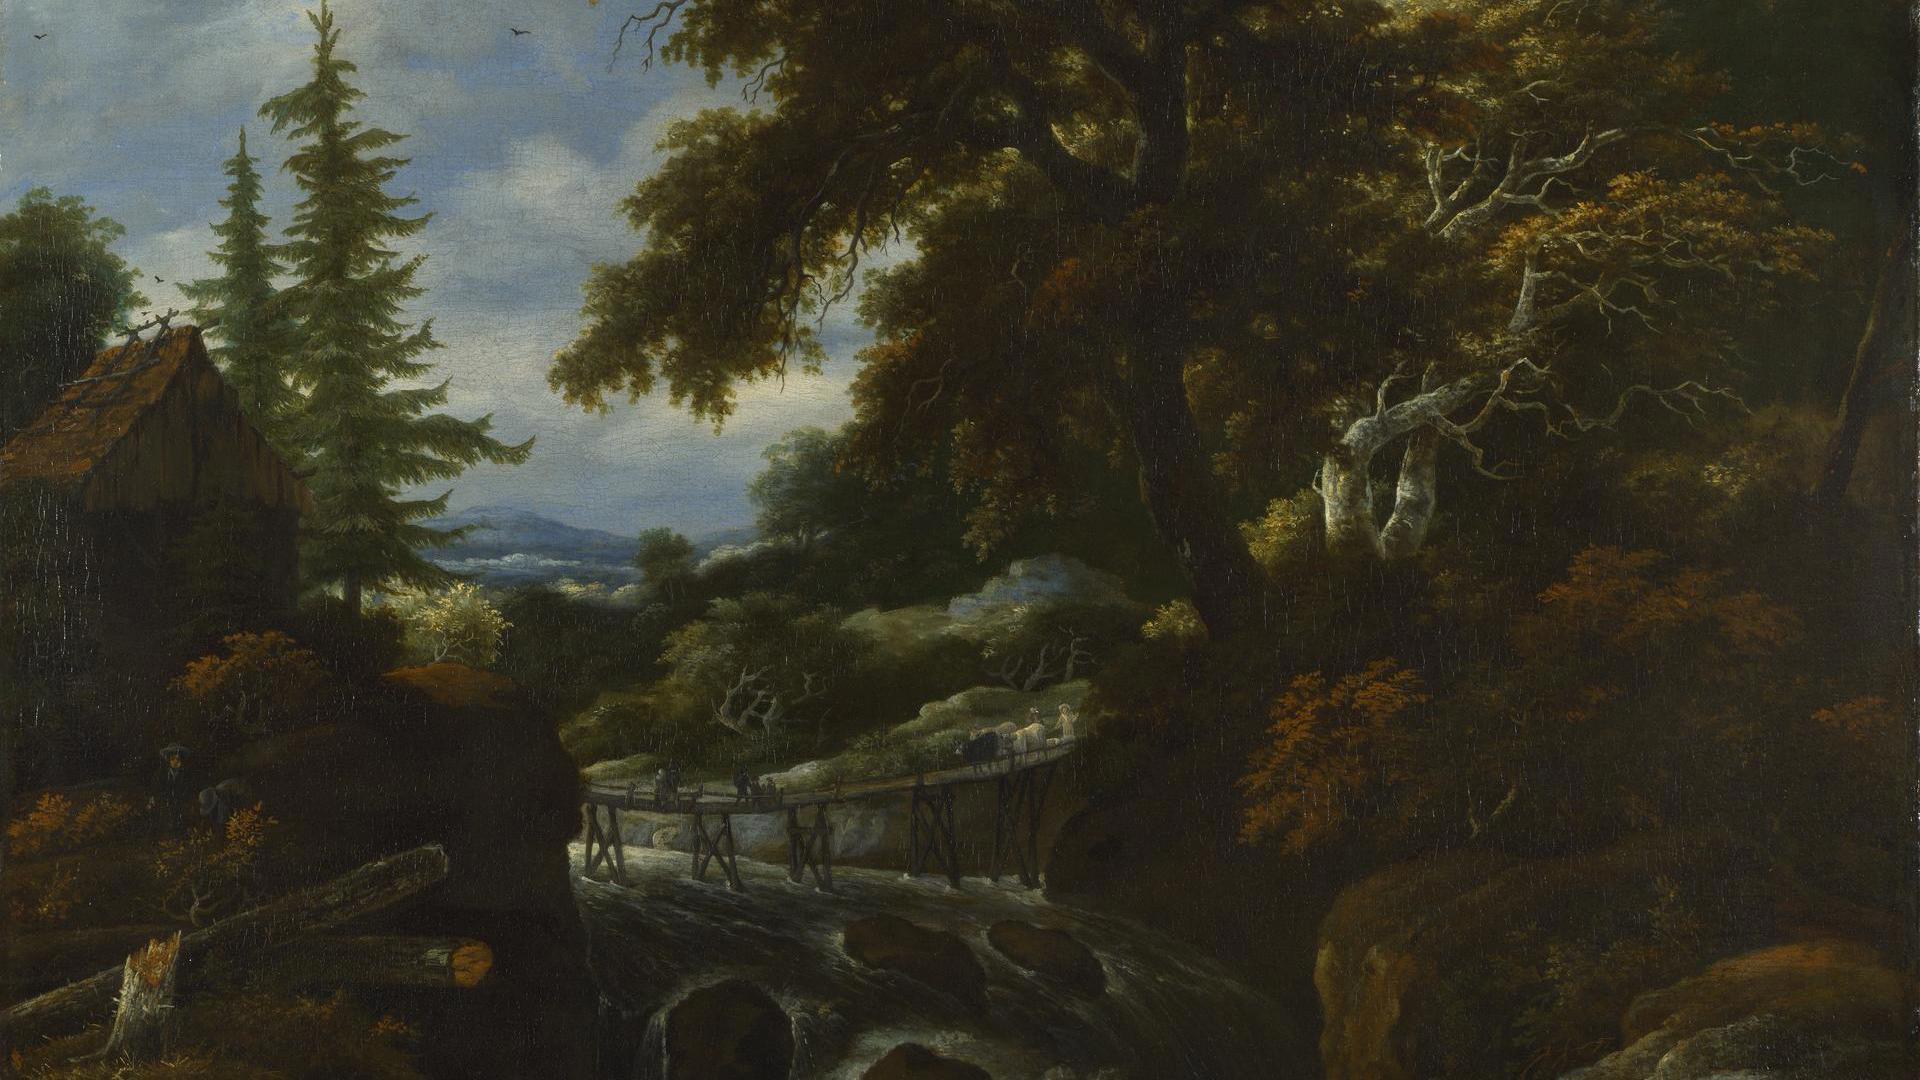 A Waterfall by a Cottage in a Hilly Landscape by Jacob Salomonsz. van Ruysdael